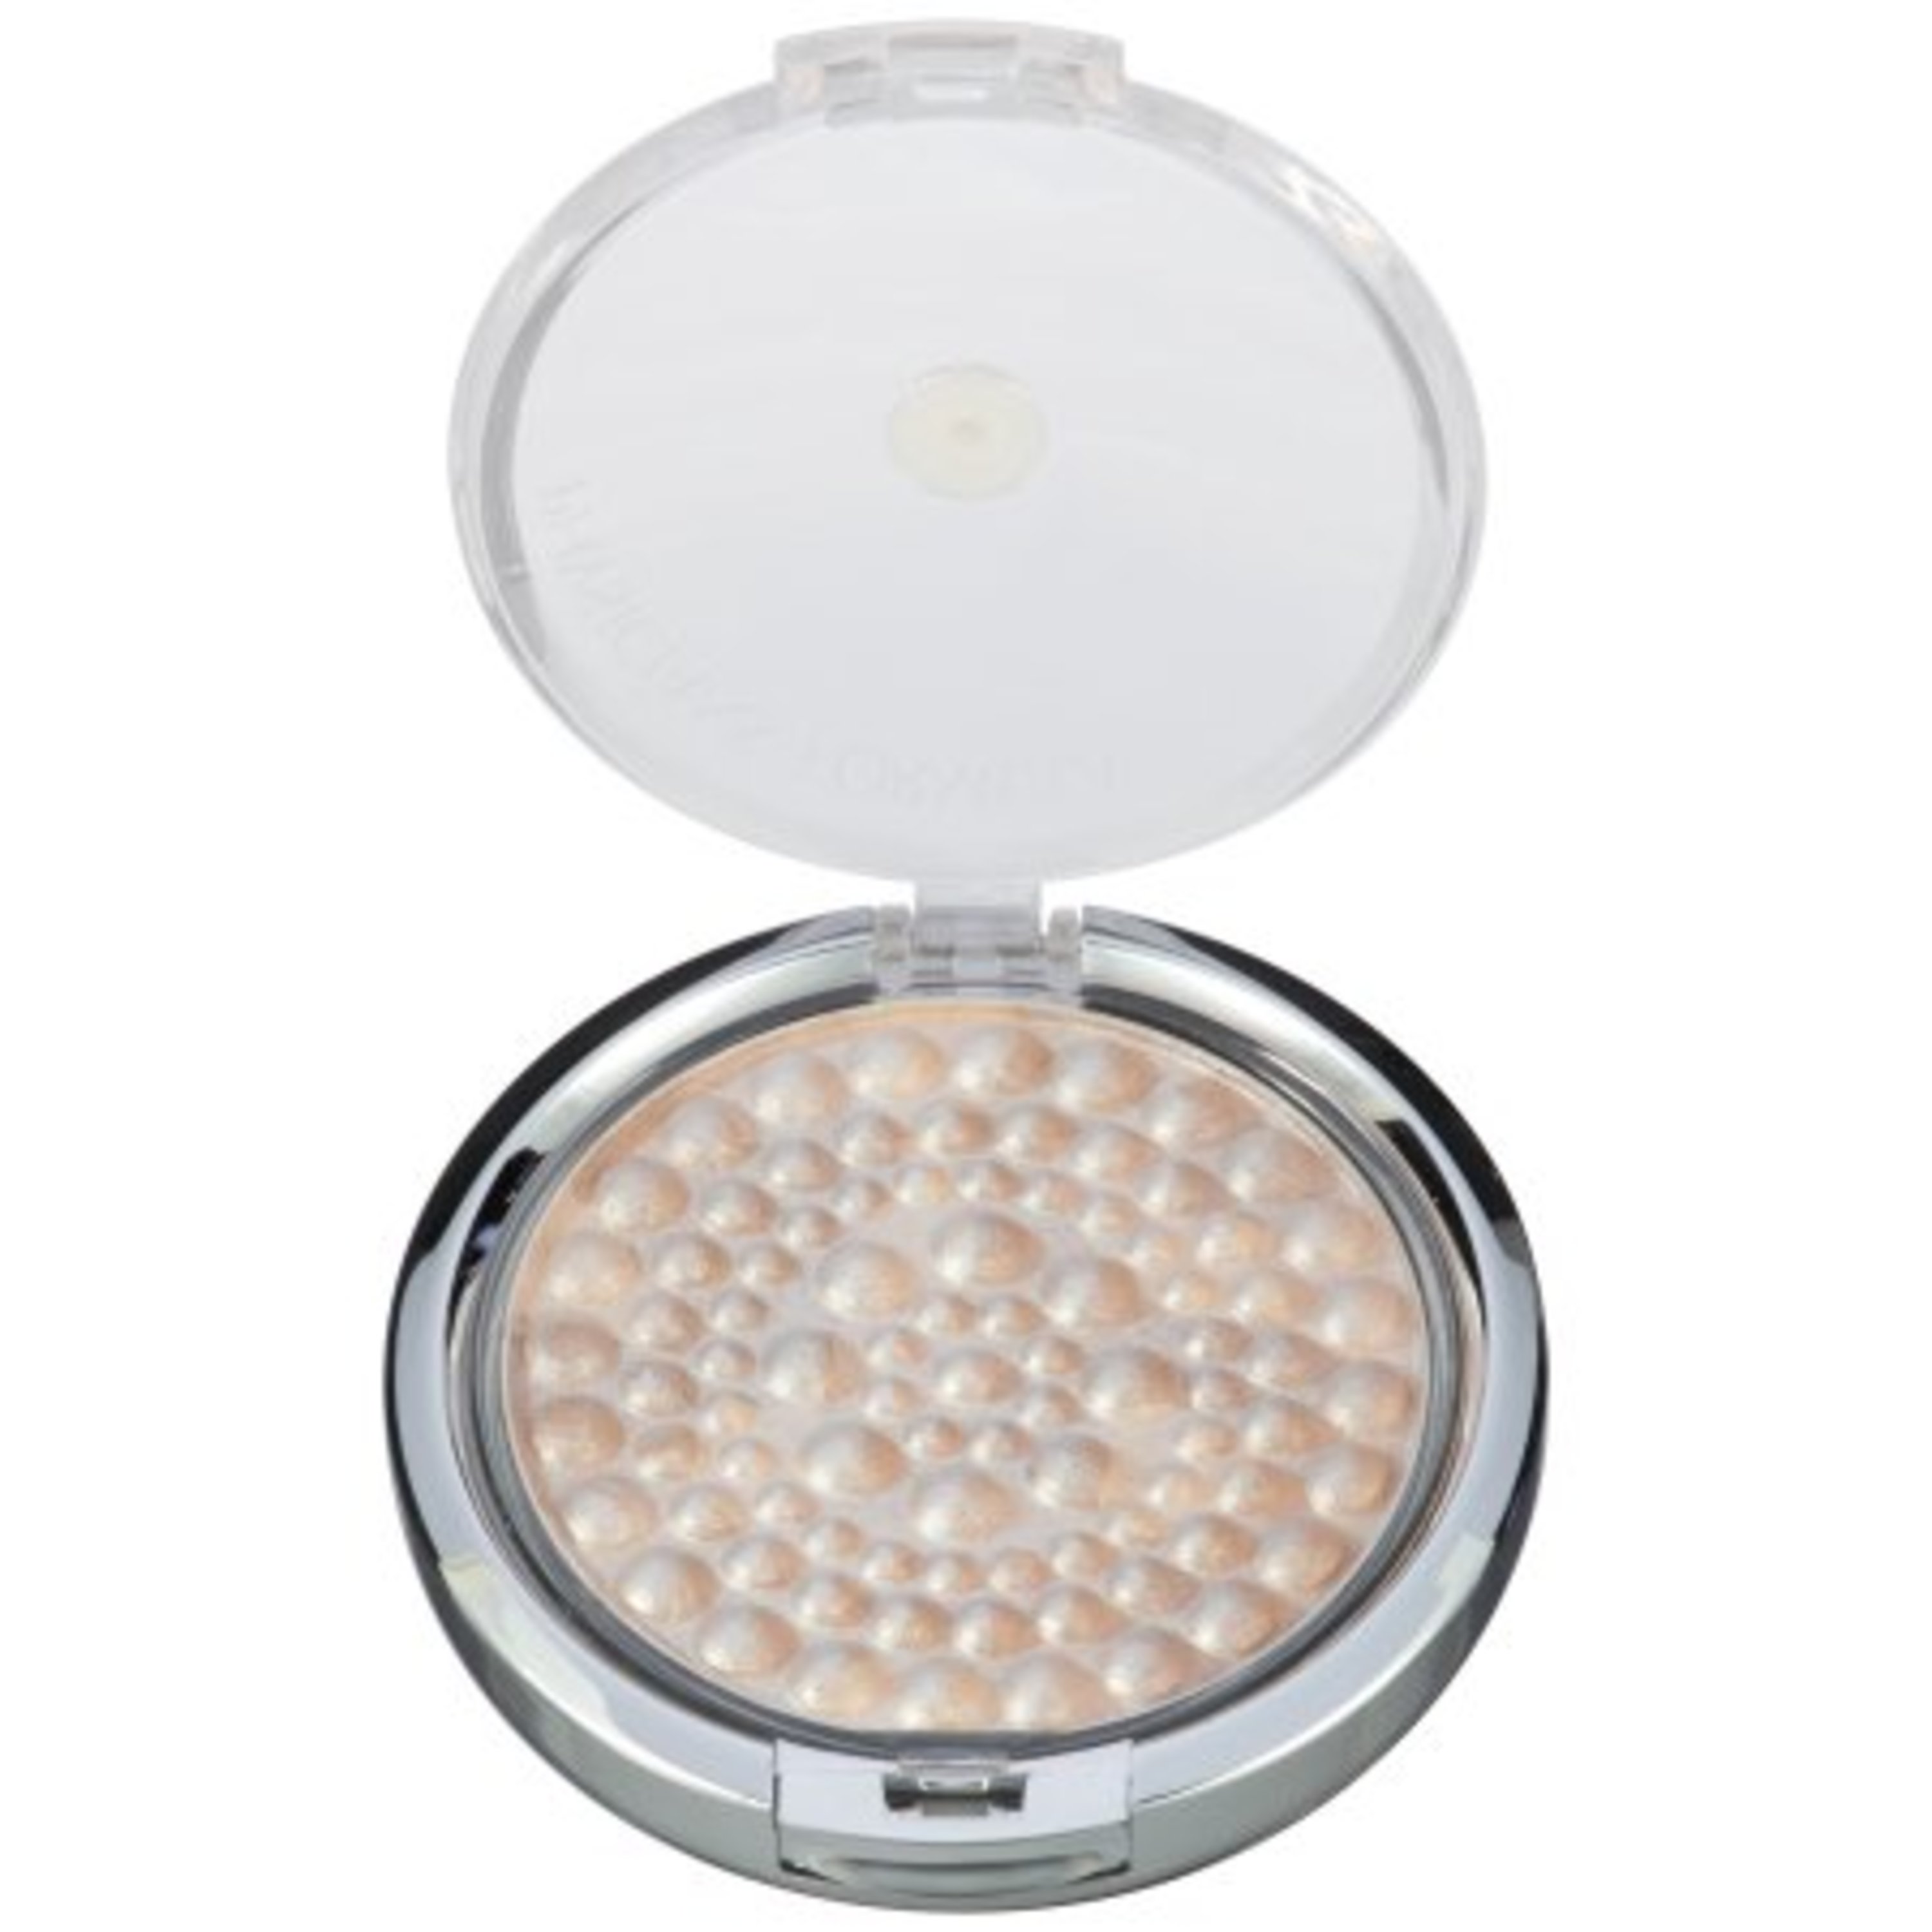 Physicians Formula Powder Palette® Mineral Glow Pearls, Beige Pearl - image 1 of 5